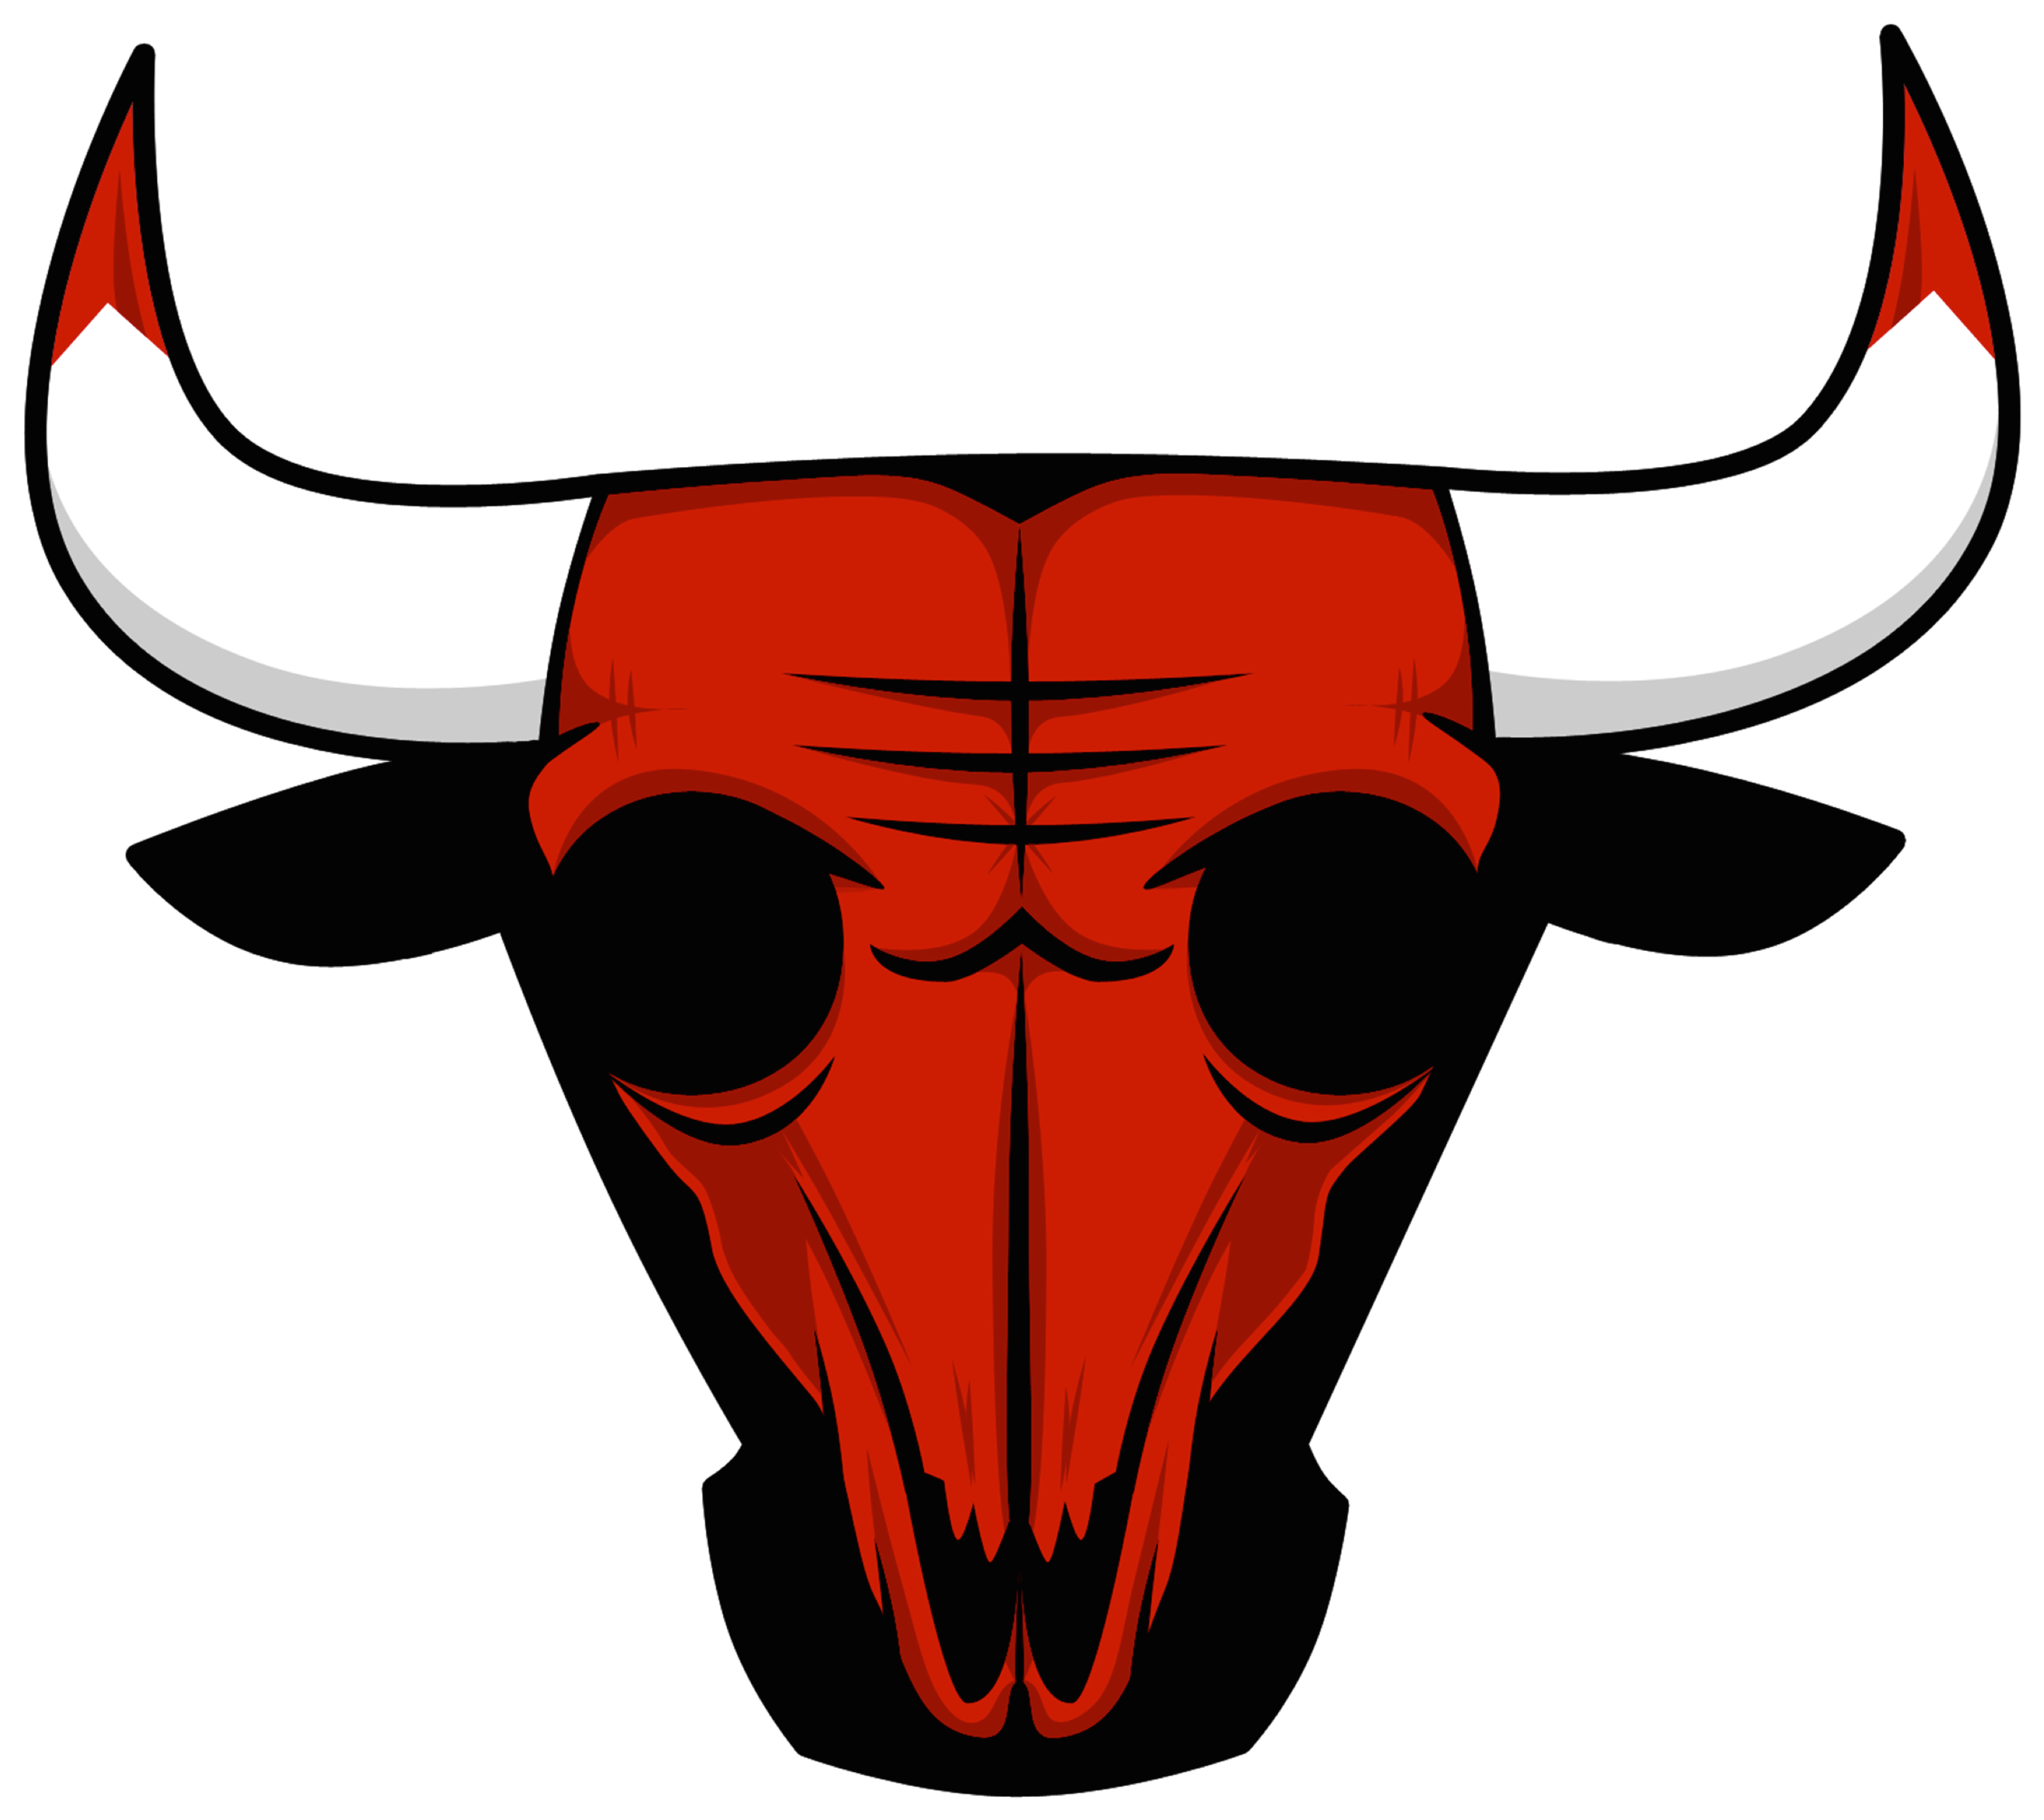 Download and share clipart about Chicago Bulls Logo Png, Find more high qua...